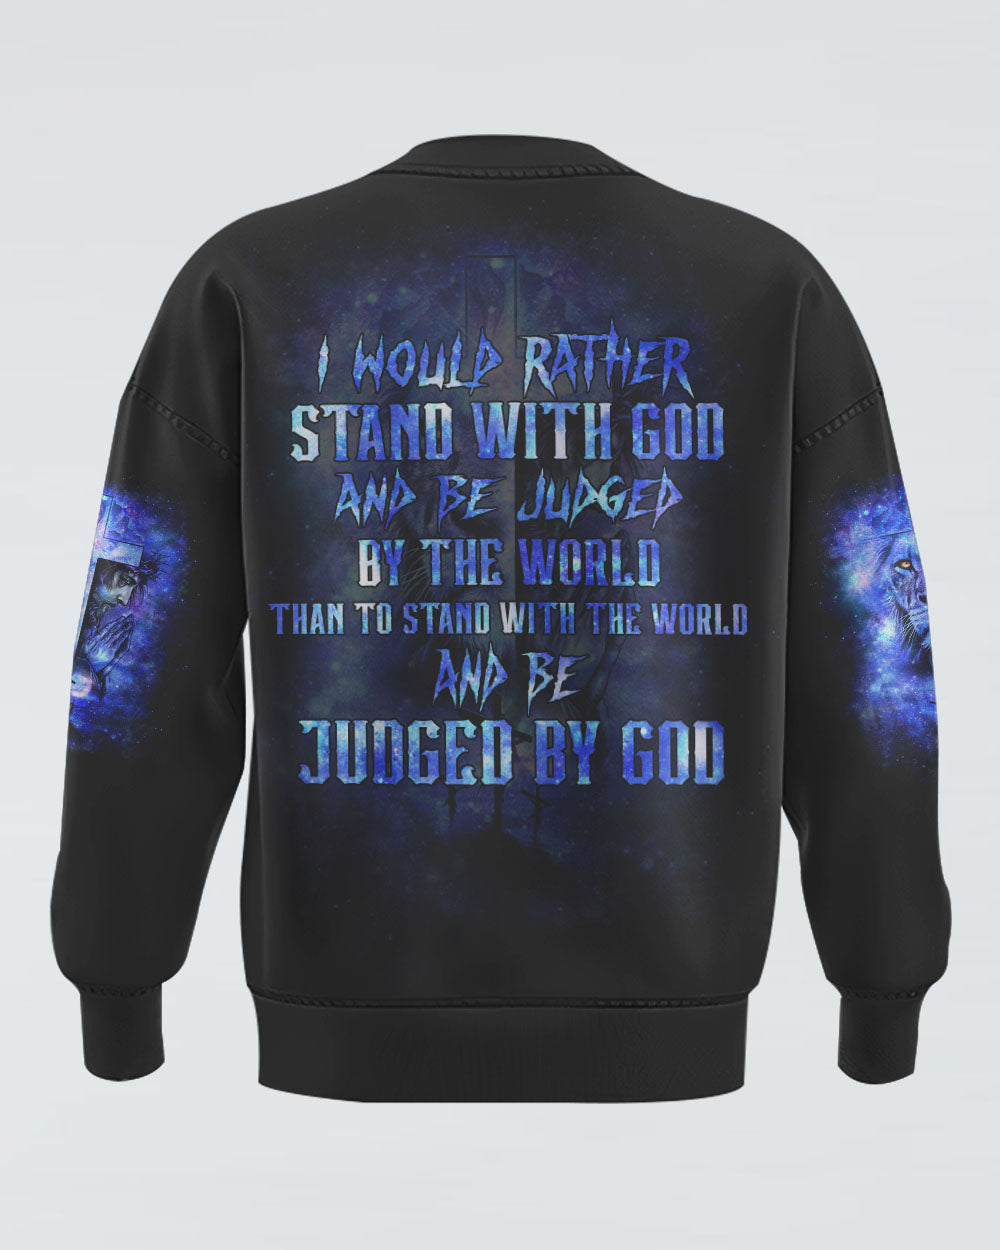 I Would Rather Stand With God And Be Judged By The World Men's Christian Sweatshirt